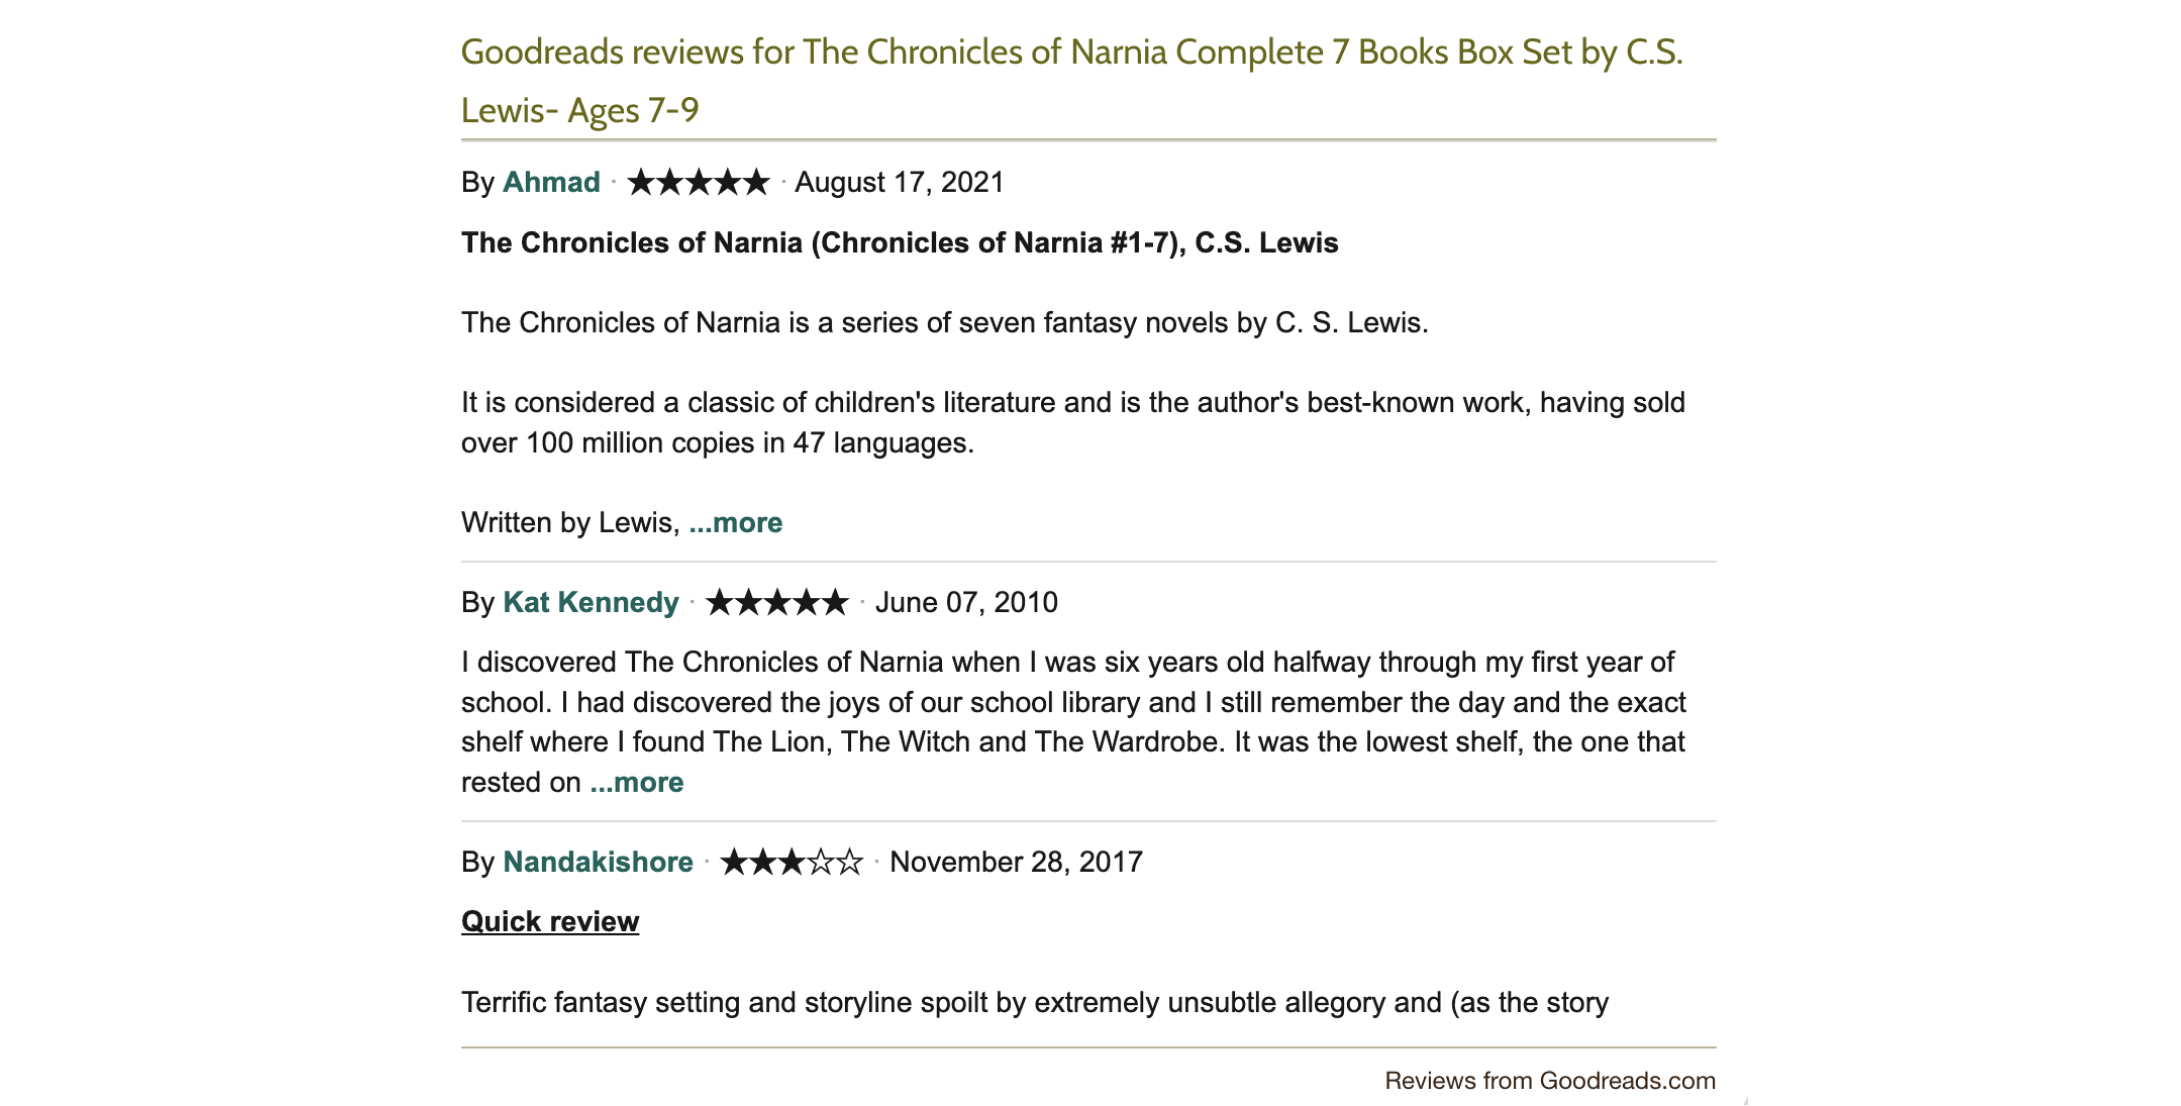 A screenshot of reviews from Goodreads for The Chronicles of Narnia displayed on The Book Bundle’s product pages. 